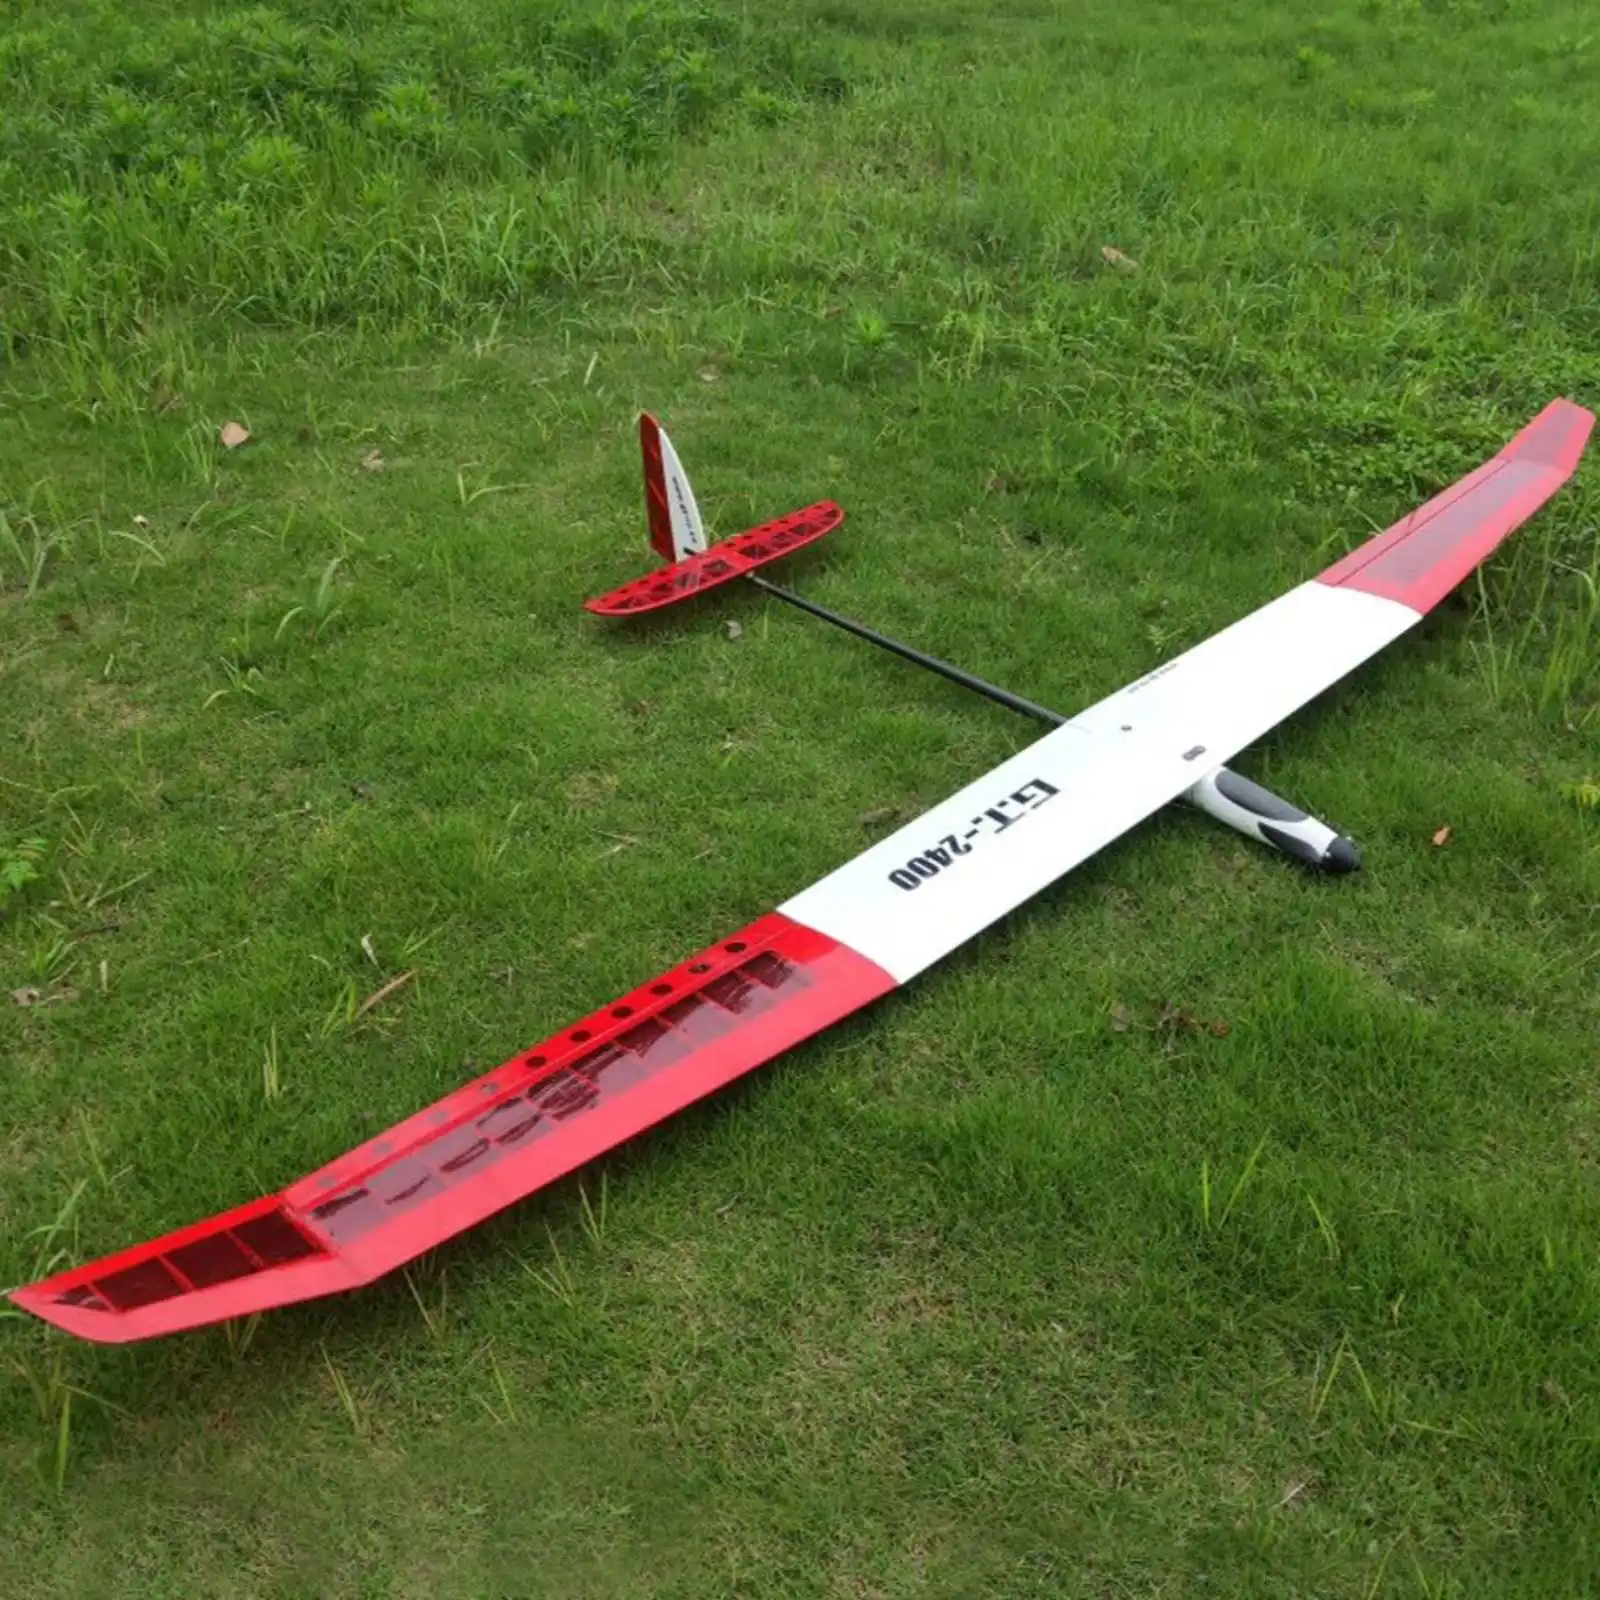 

GTRC GT2400 2400mm Wingspan Balsa Wood RC Airplane Glider KIT PNP Electric Aircraft Remote Control Plane Drone Outdoor Toys Jet